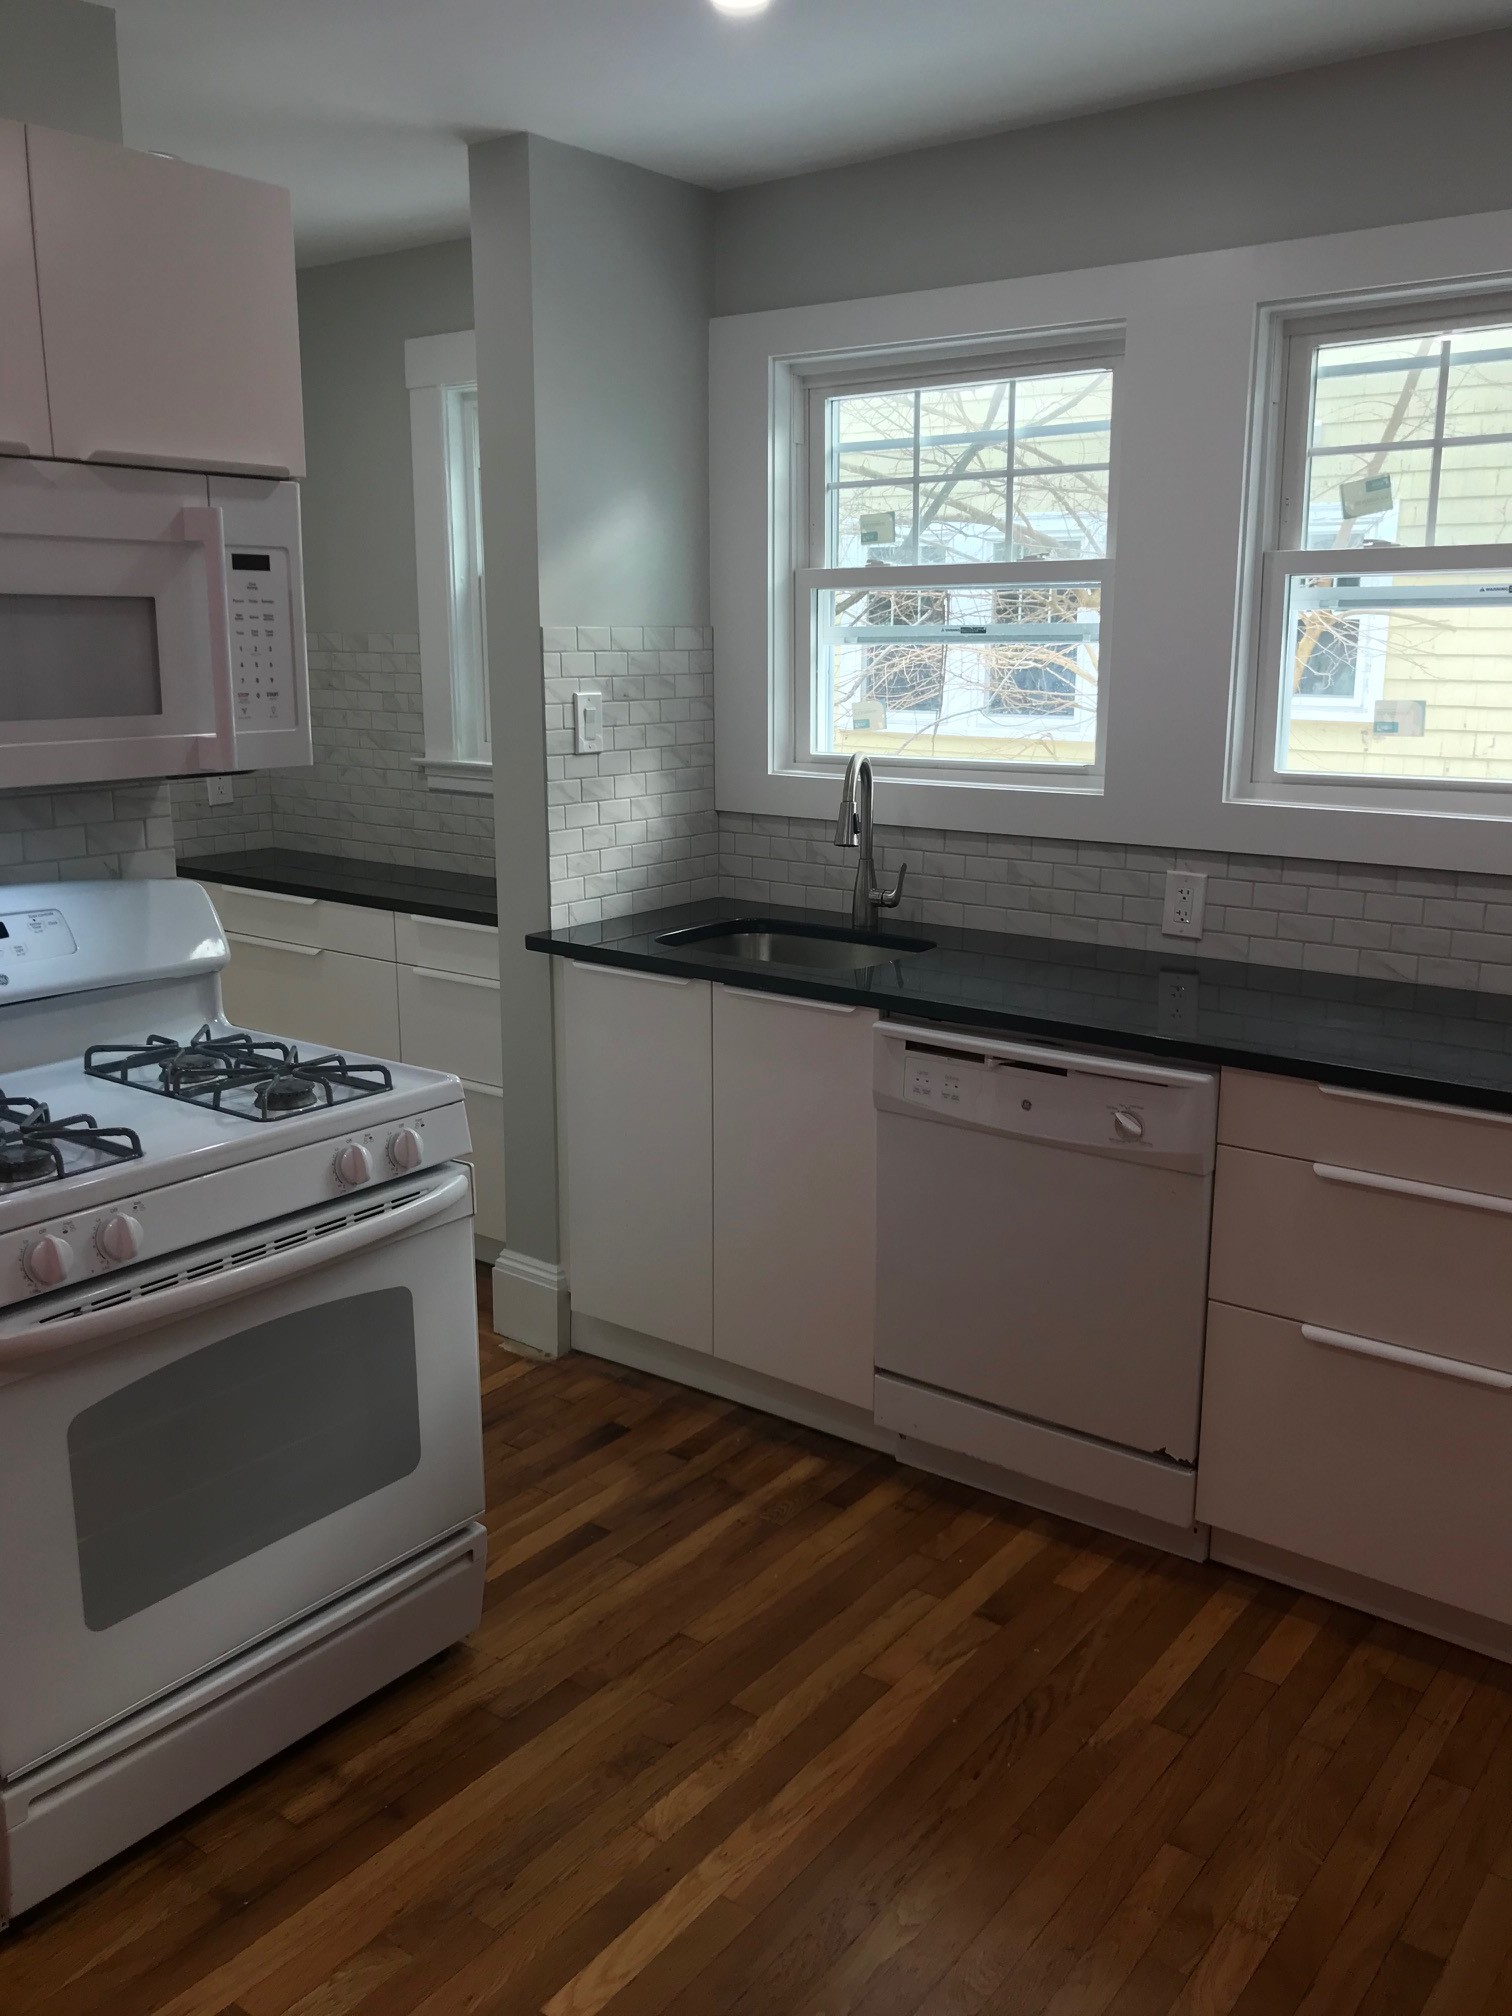 Photos of apartment on Willoughby St.,Boston MA 02135